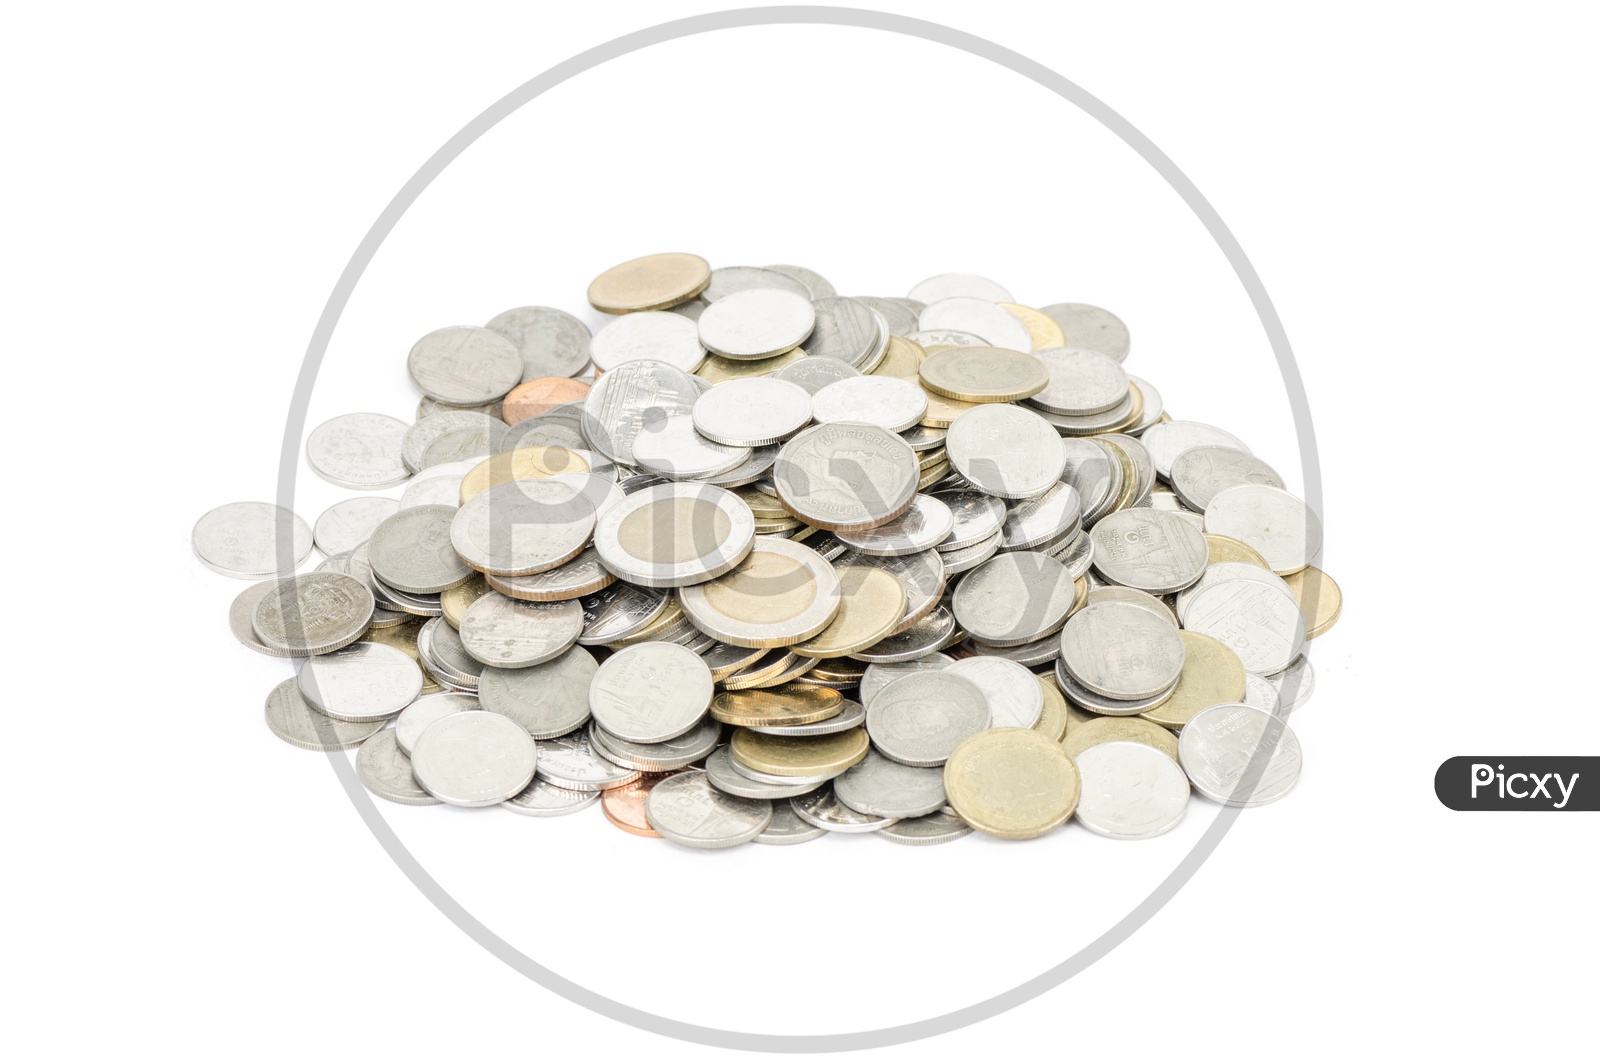 Currency Coins Pile Over an isolated White Background